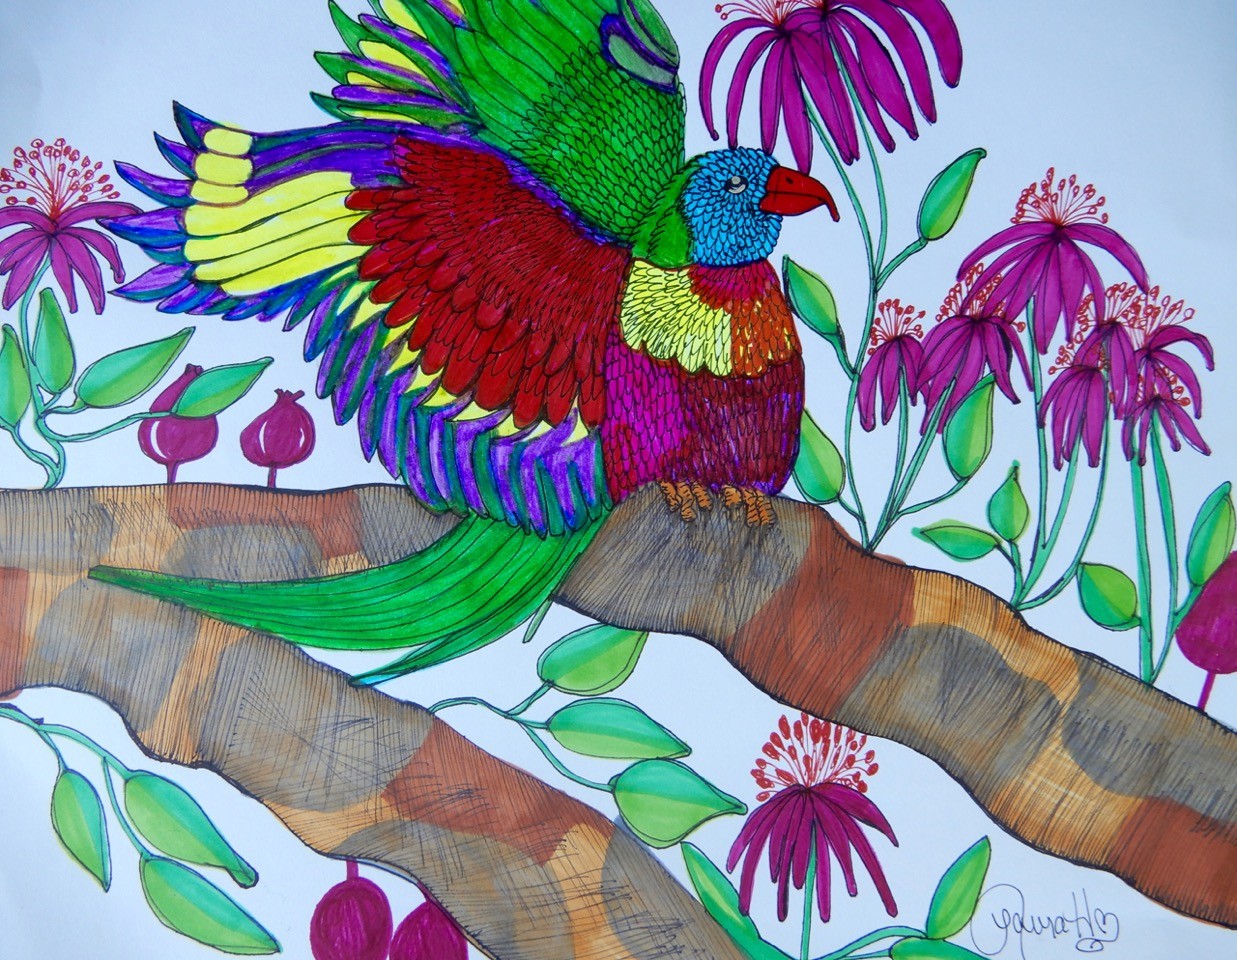 The first piece is a painting called, “Cheeky Rainbow Parrot” by Laura Hudson. This very colorful painting shows a parrot bright red, blue and yellow in its body and gorgeous feathers. The parrot is sitting on thick branches that have several shades of brown. Growing out of the branches are purple flowers with red stamens and green leaves. The whole scene is set against a background of blue sky. 